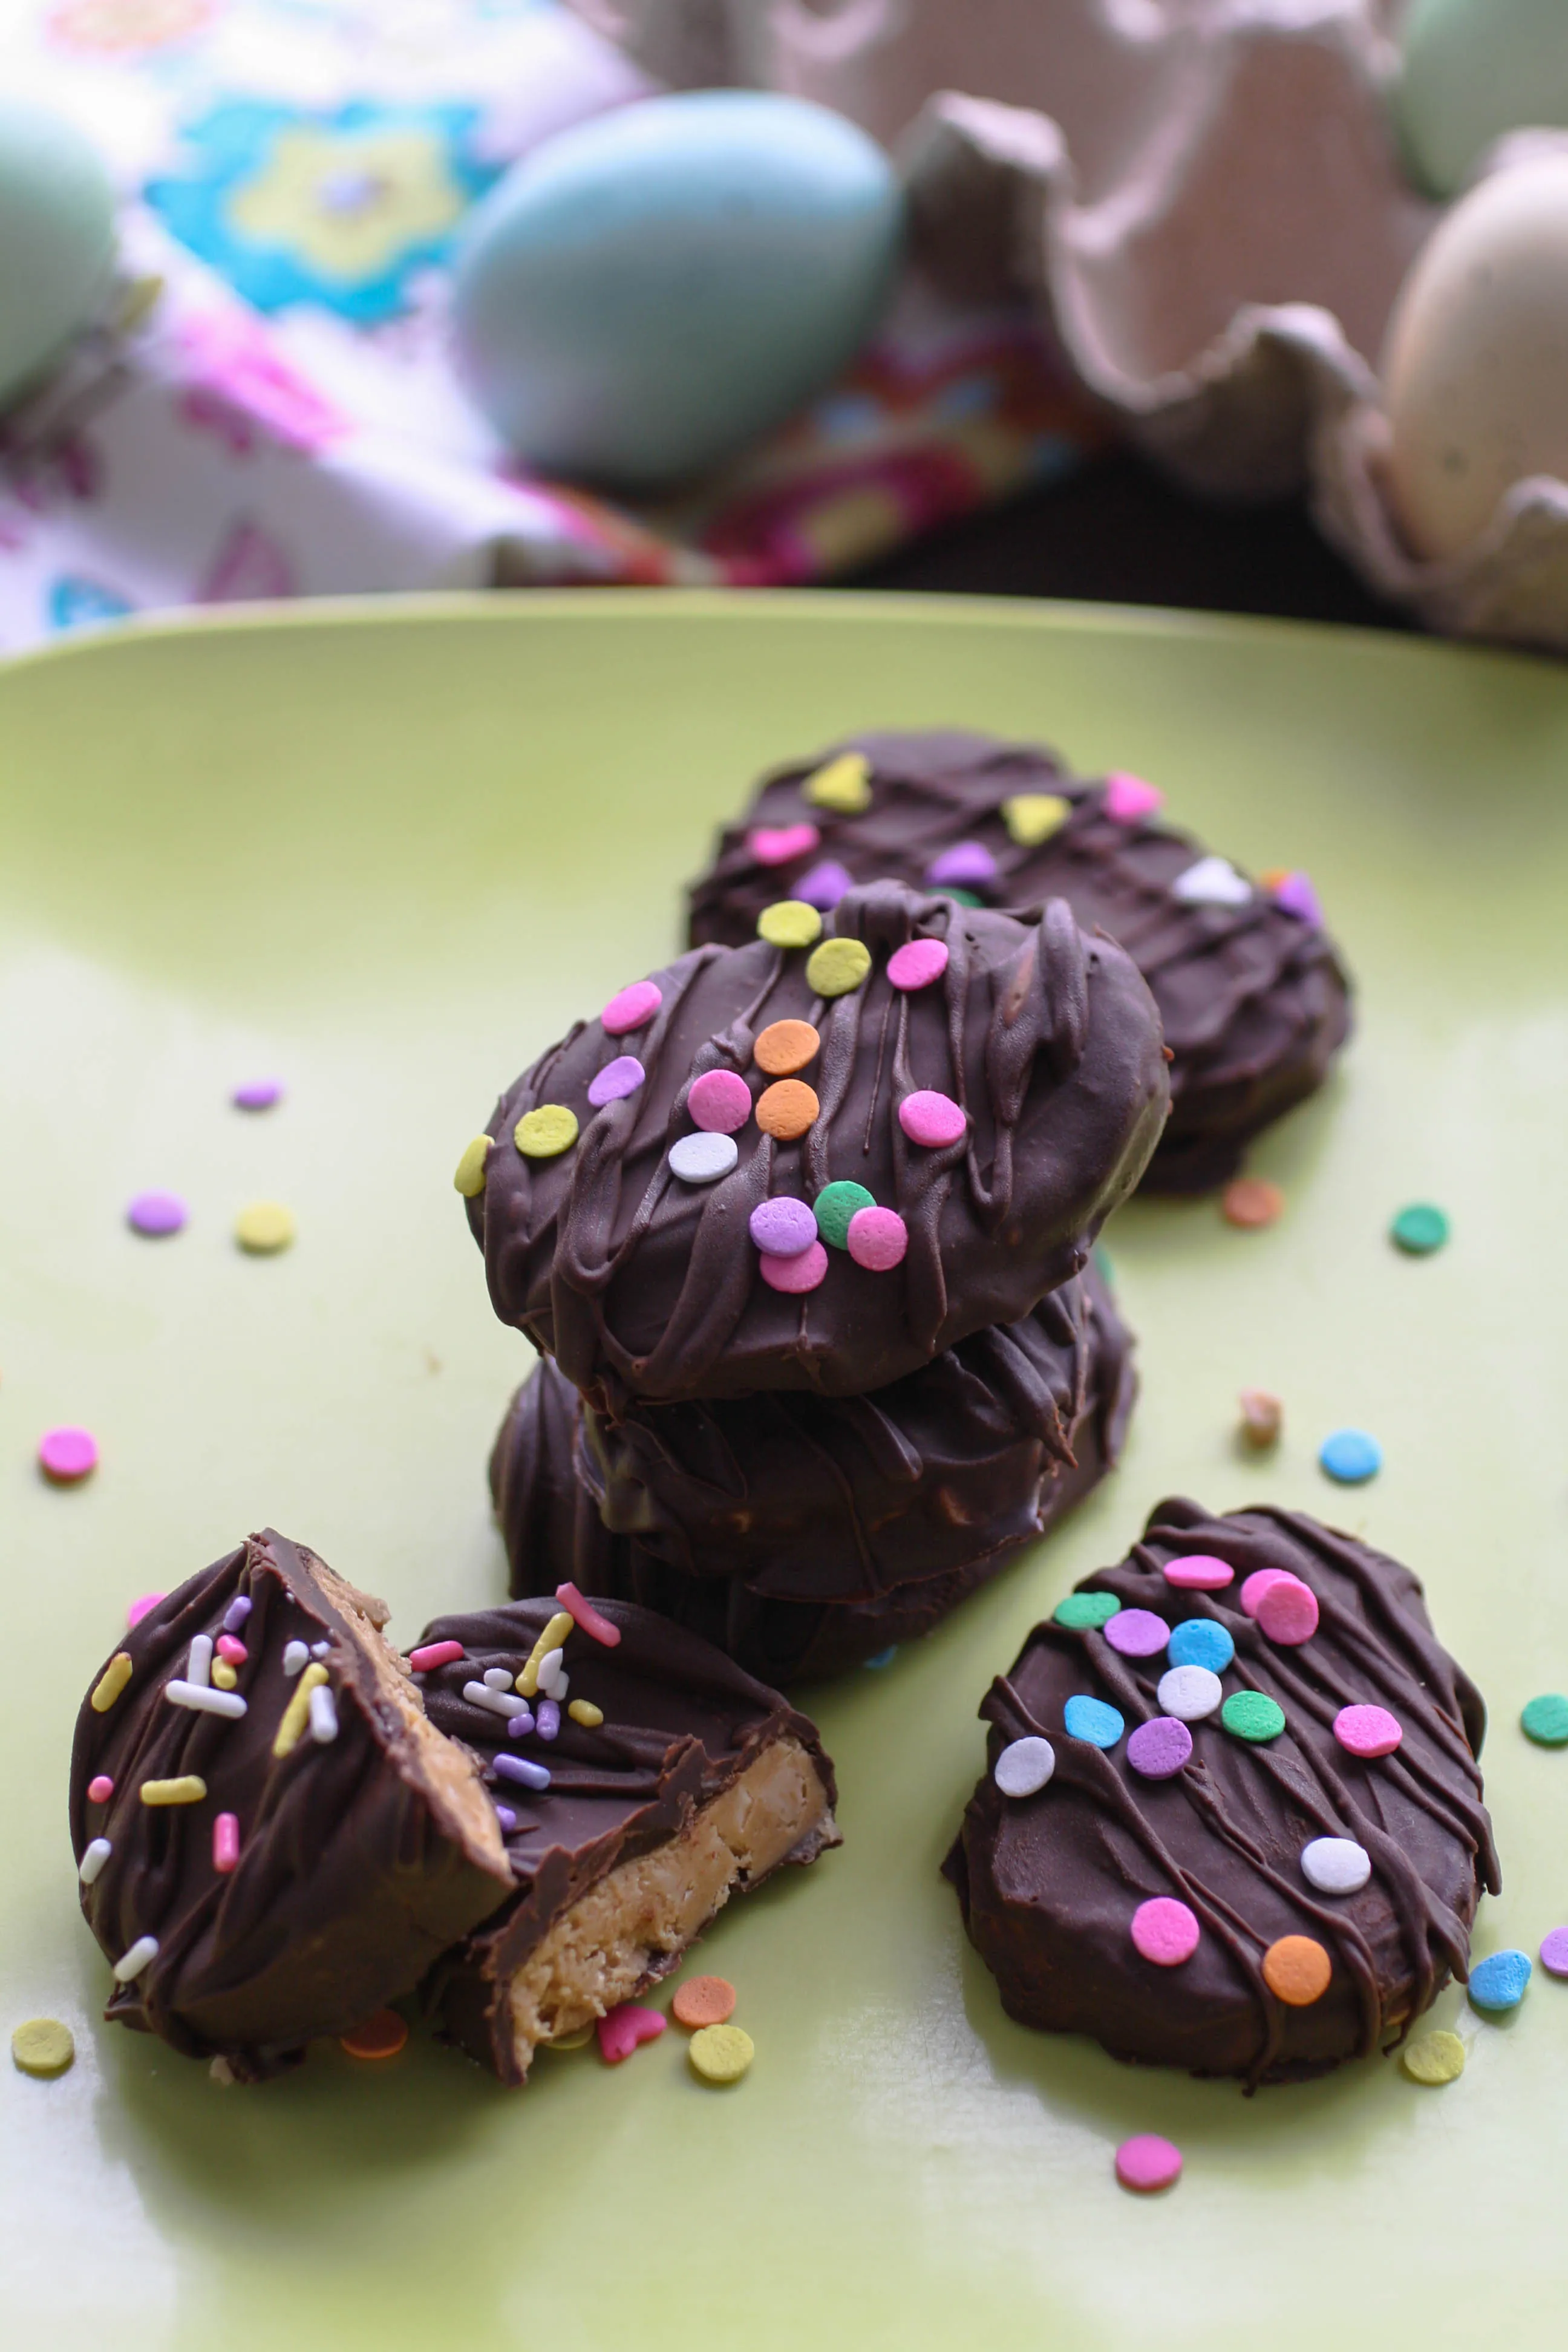 Peanut Butter-Toffee Chocolate Eggs are perfect to share with friends and family. Make an extra batch for yourself!